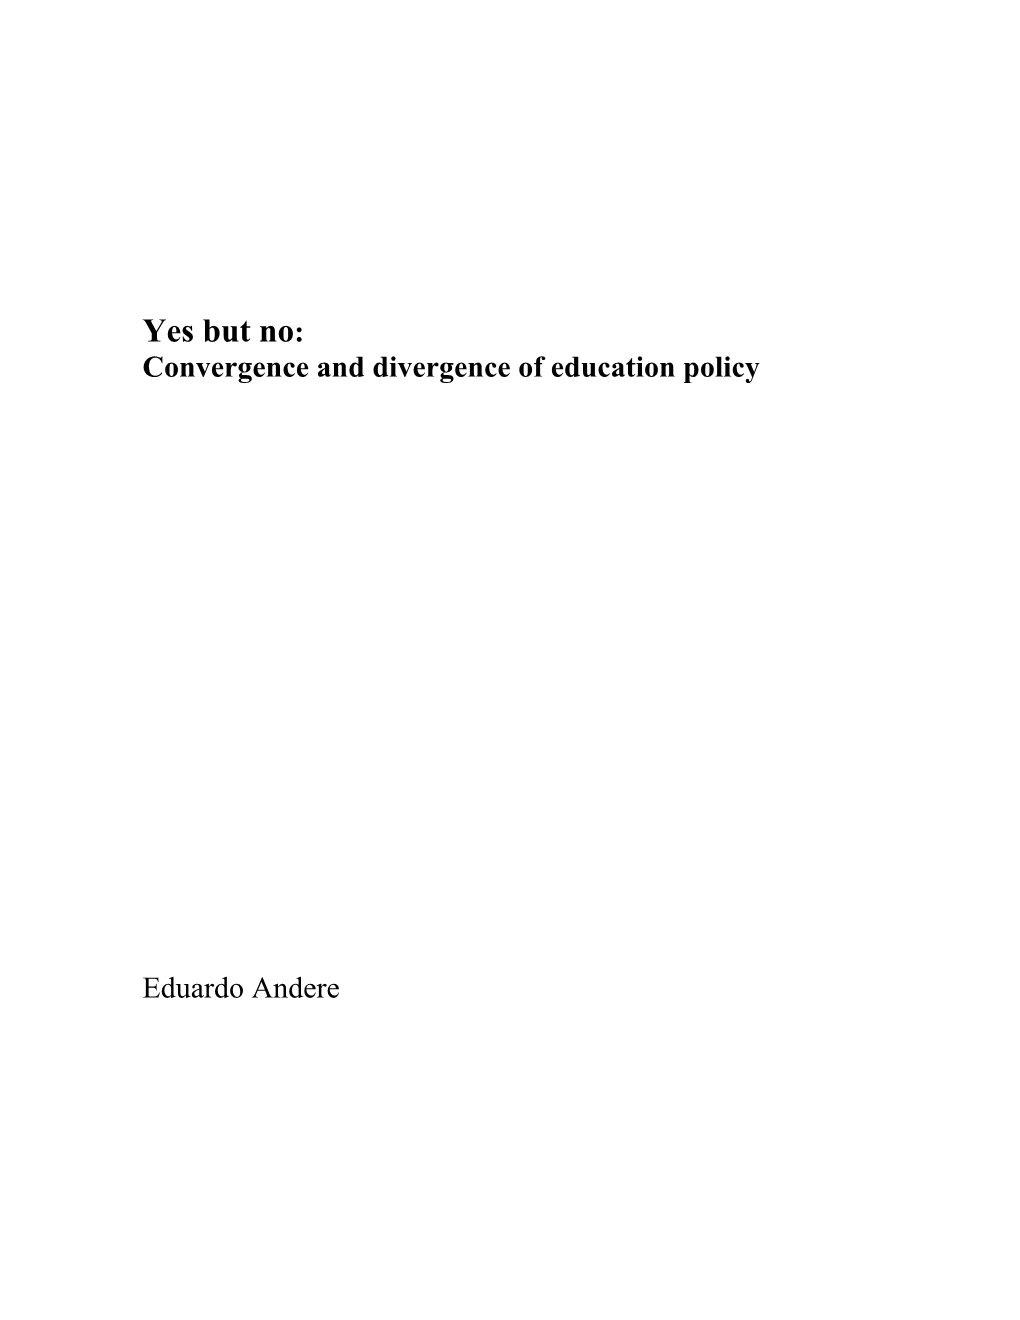 Yes but No: Convergence and Divergence of Education Policy